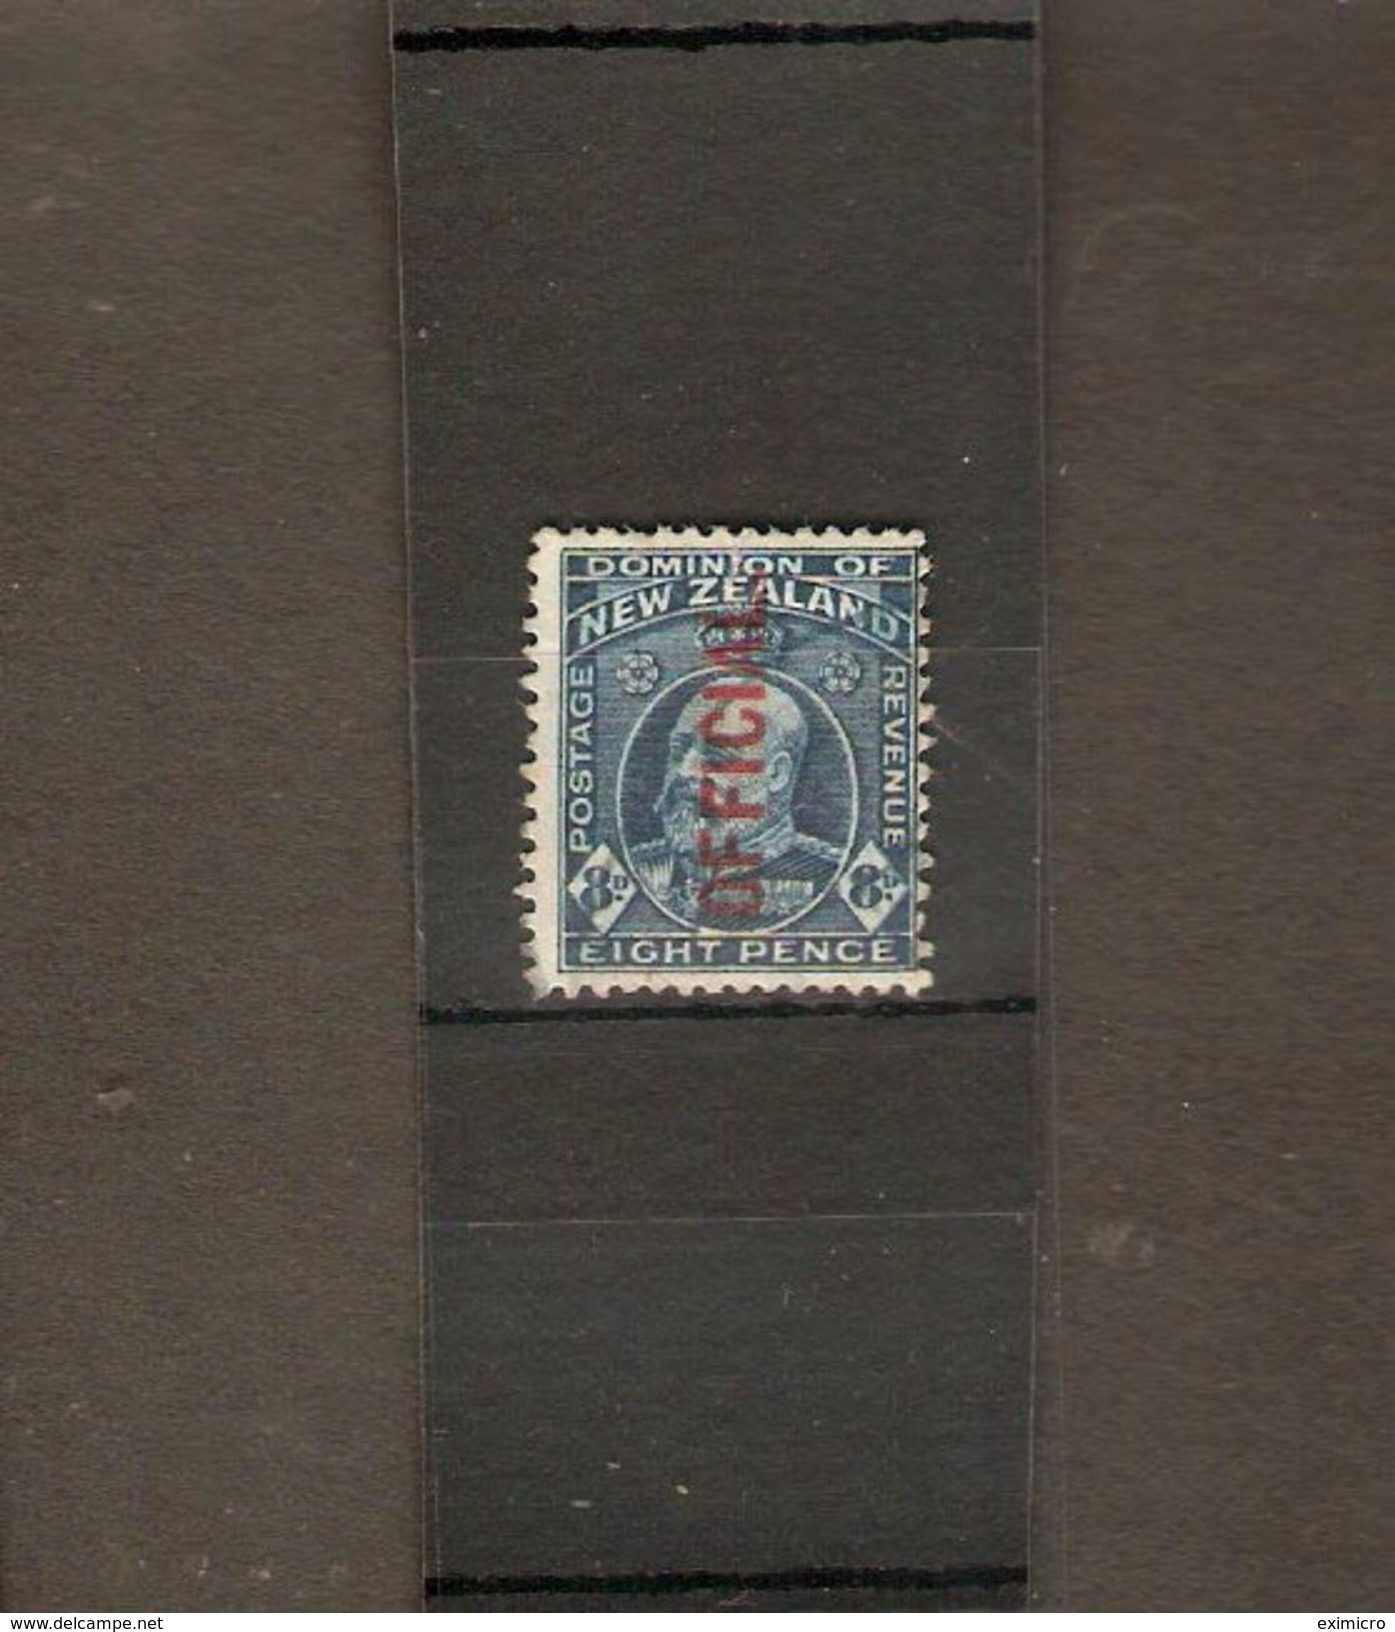 NEW ZEALAND 1916 8d OFFICIAL SG O76b PERF 14 X 13½ FINE USED Cat £29 - Officials